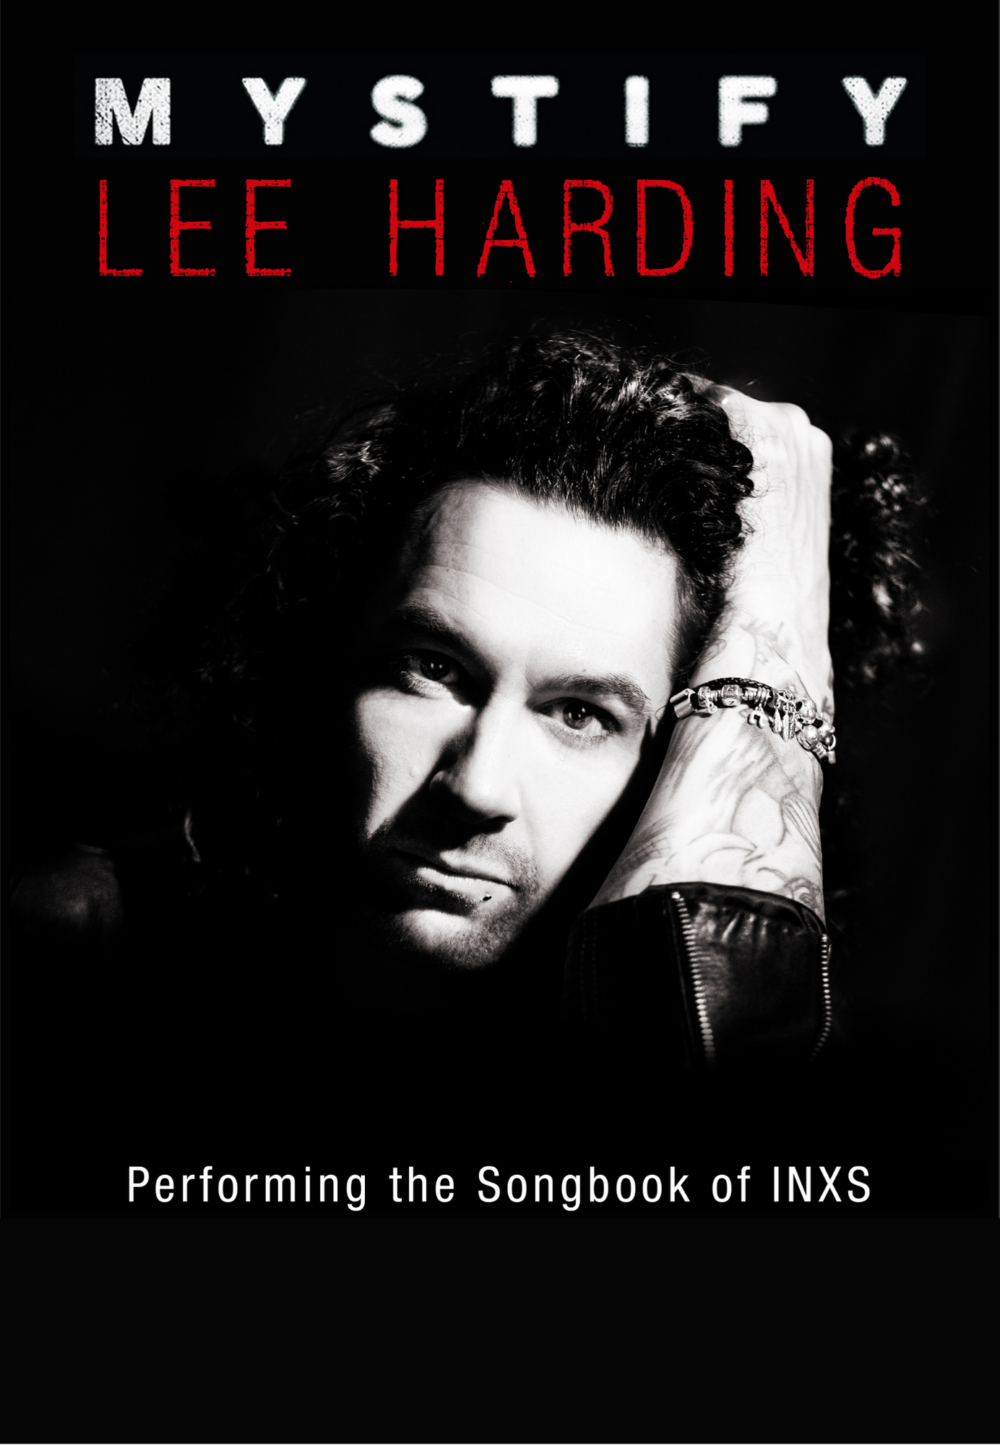 MYSTIFY - The Songbook Of INXS Featuring Lee Harding